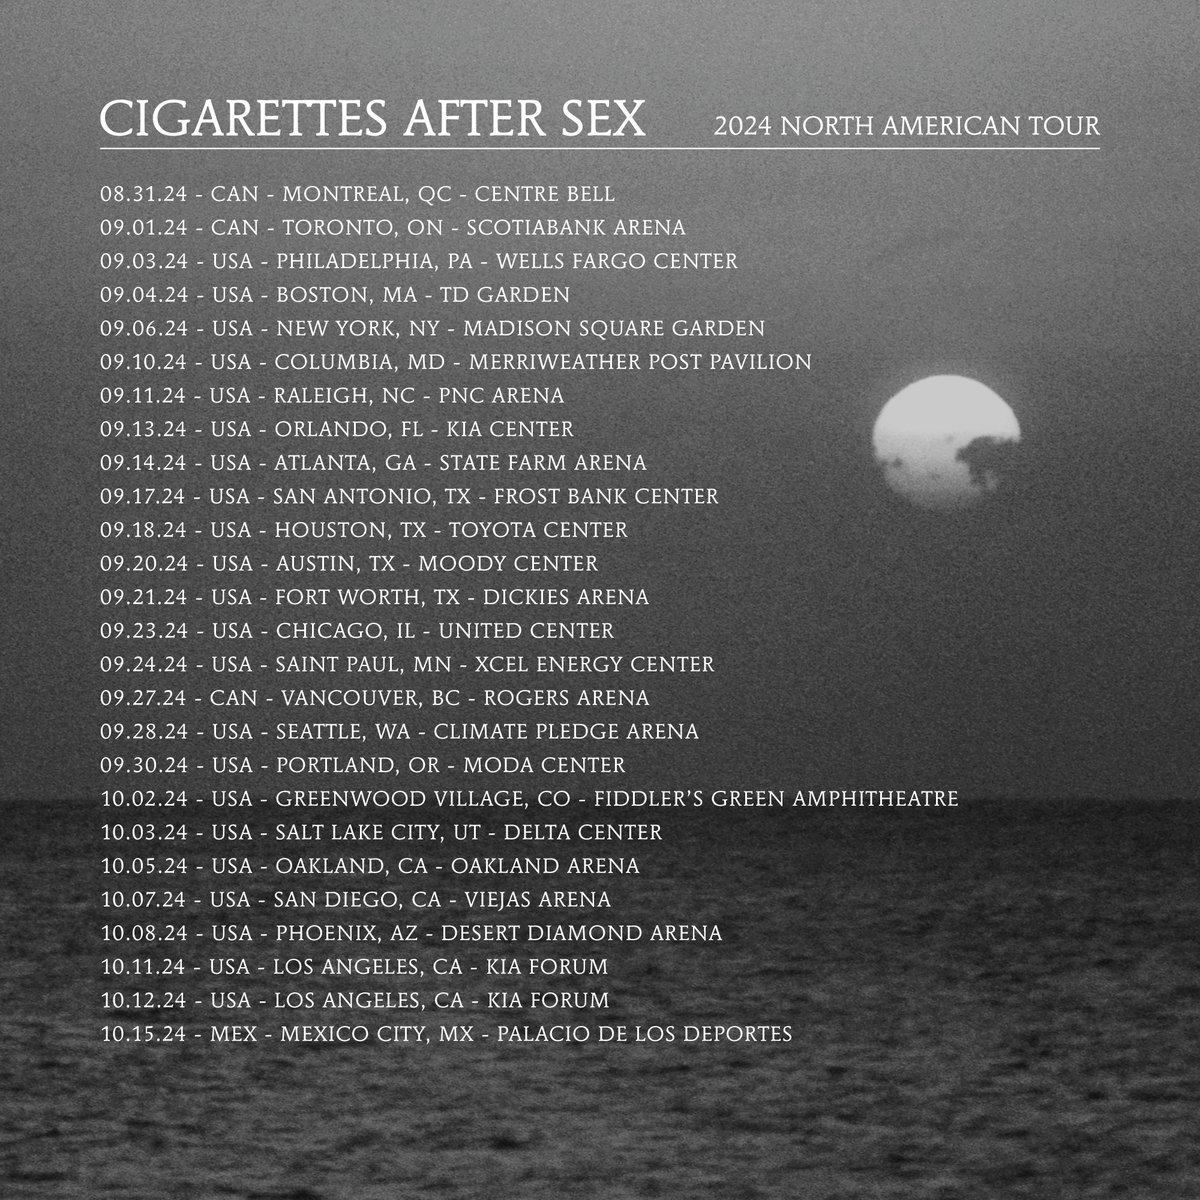 north american sweetness this august through october. can’t wait to see you all…🖤 cigsaftersex.lnk.to/_Xs